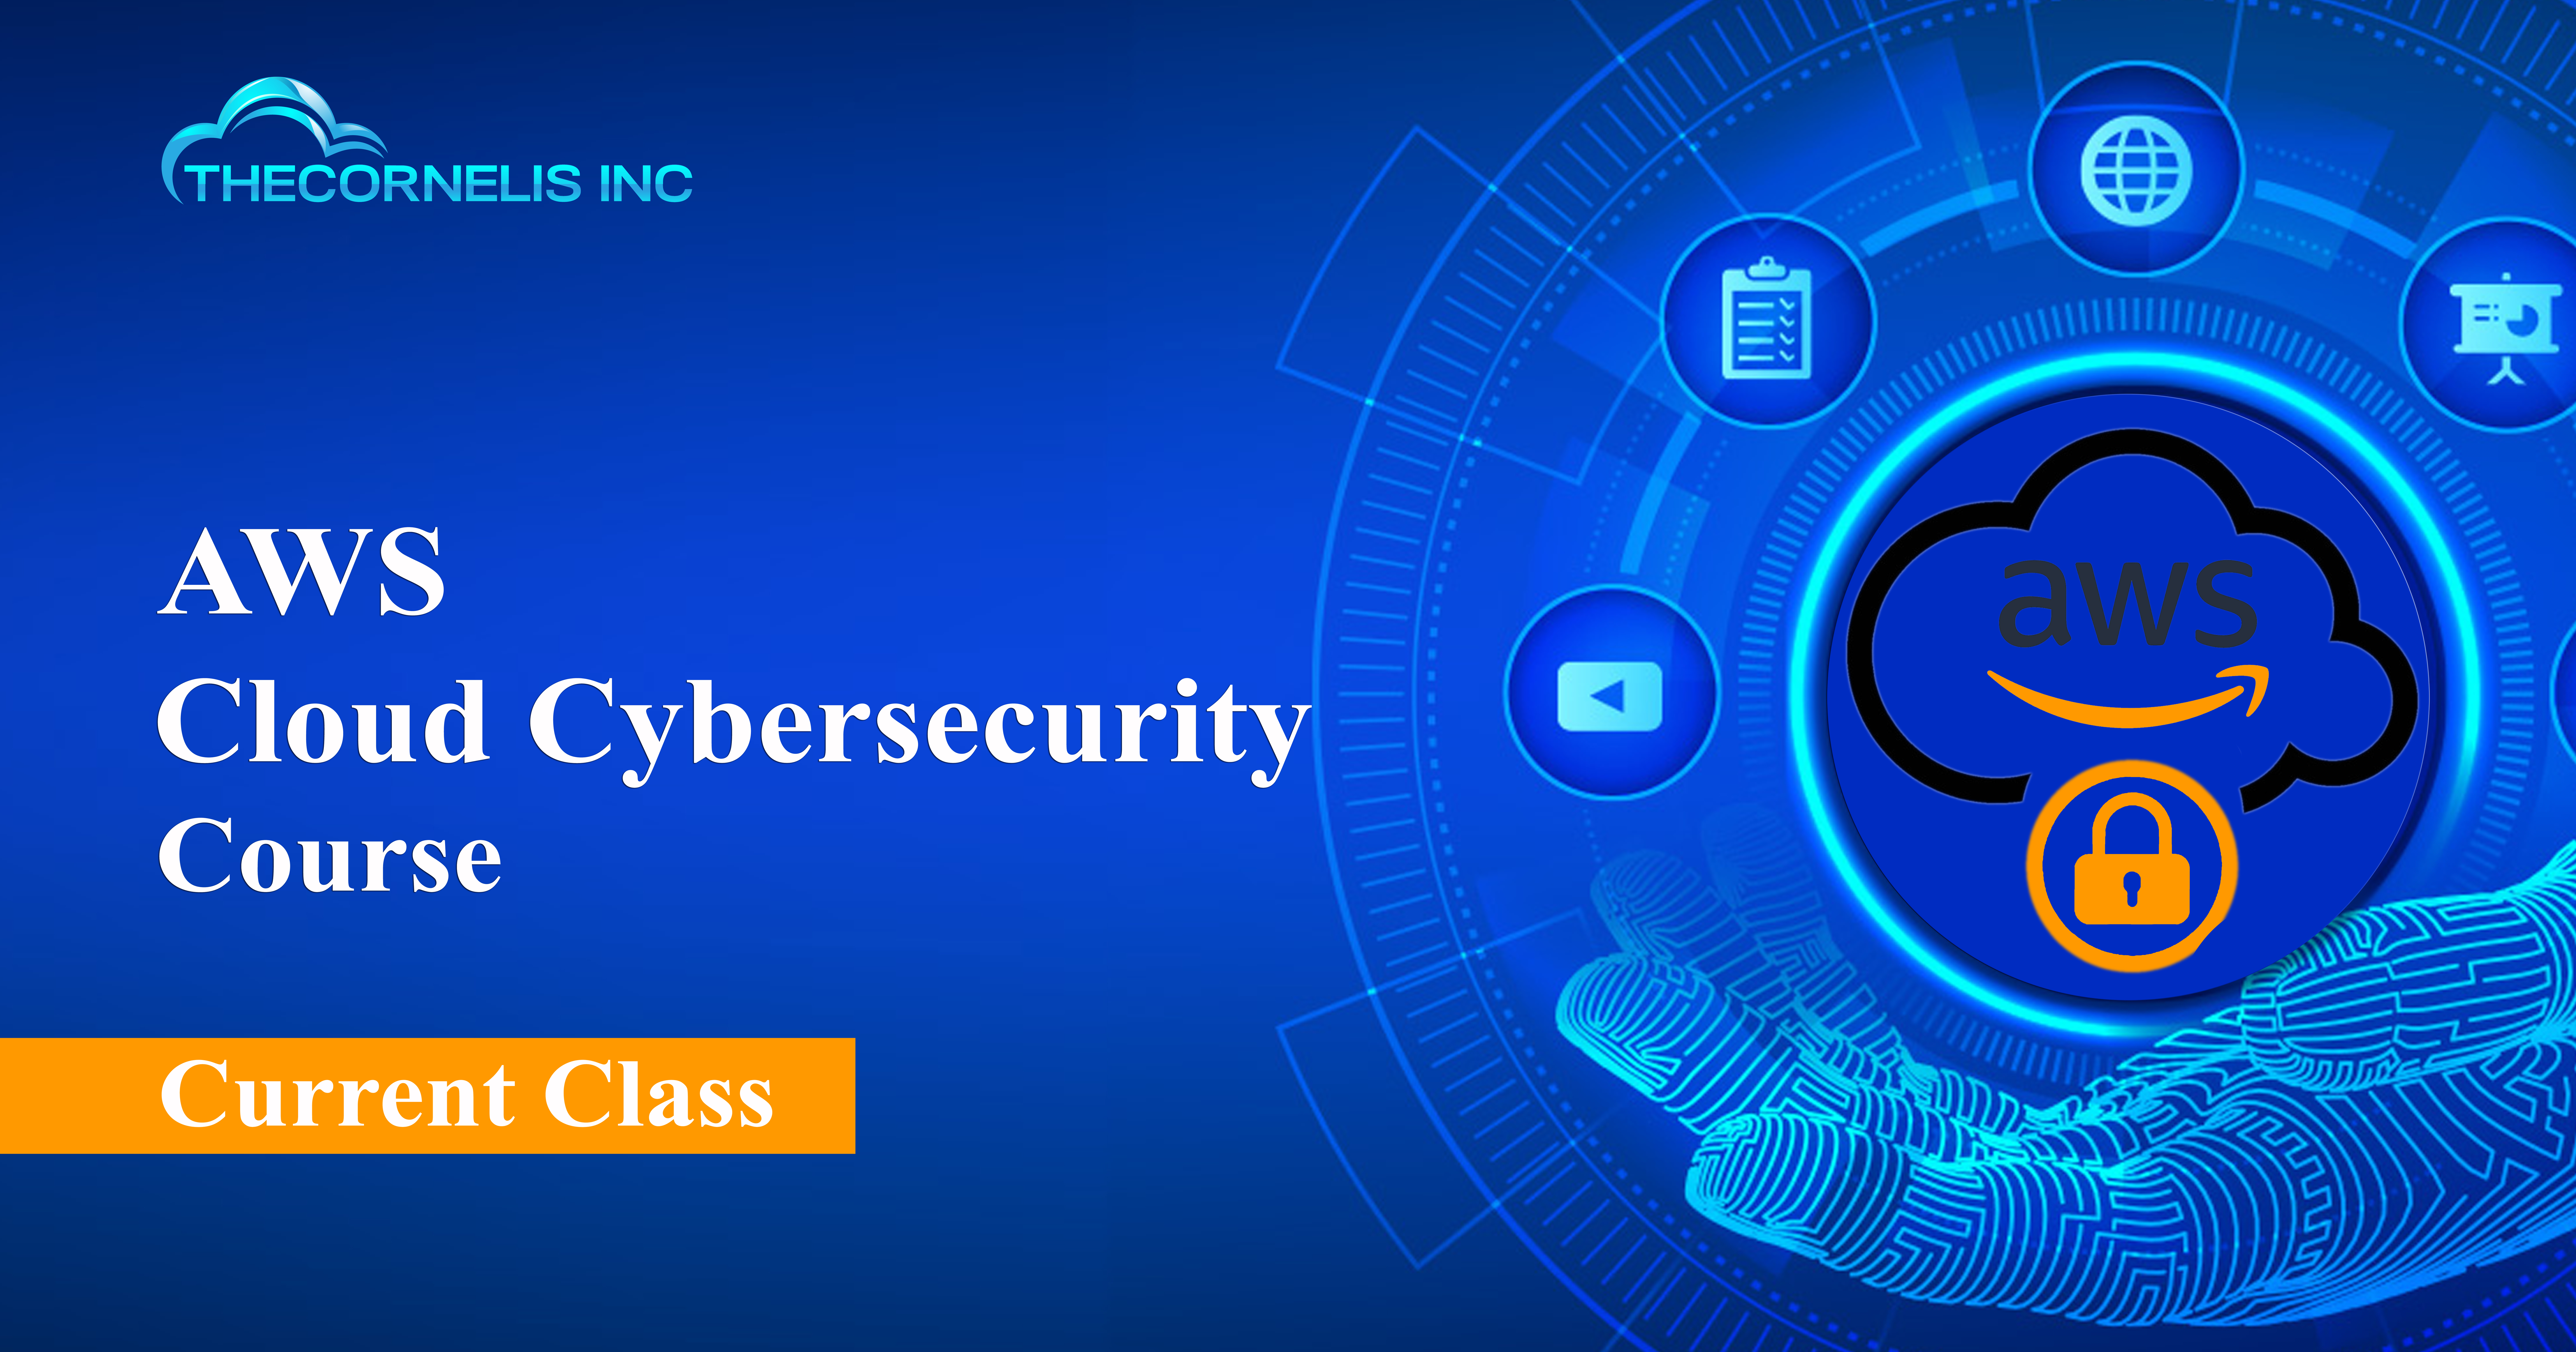 AWS Cloud Cybersecurity Course (Current Class)